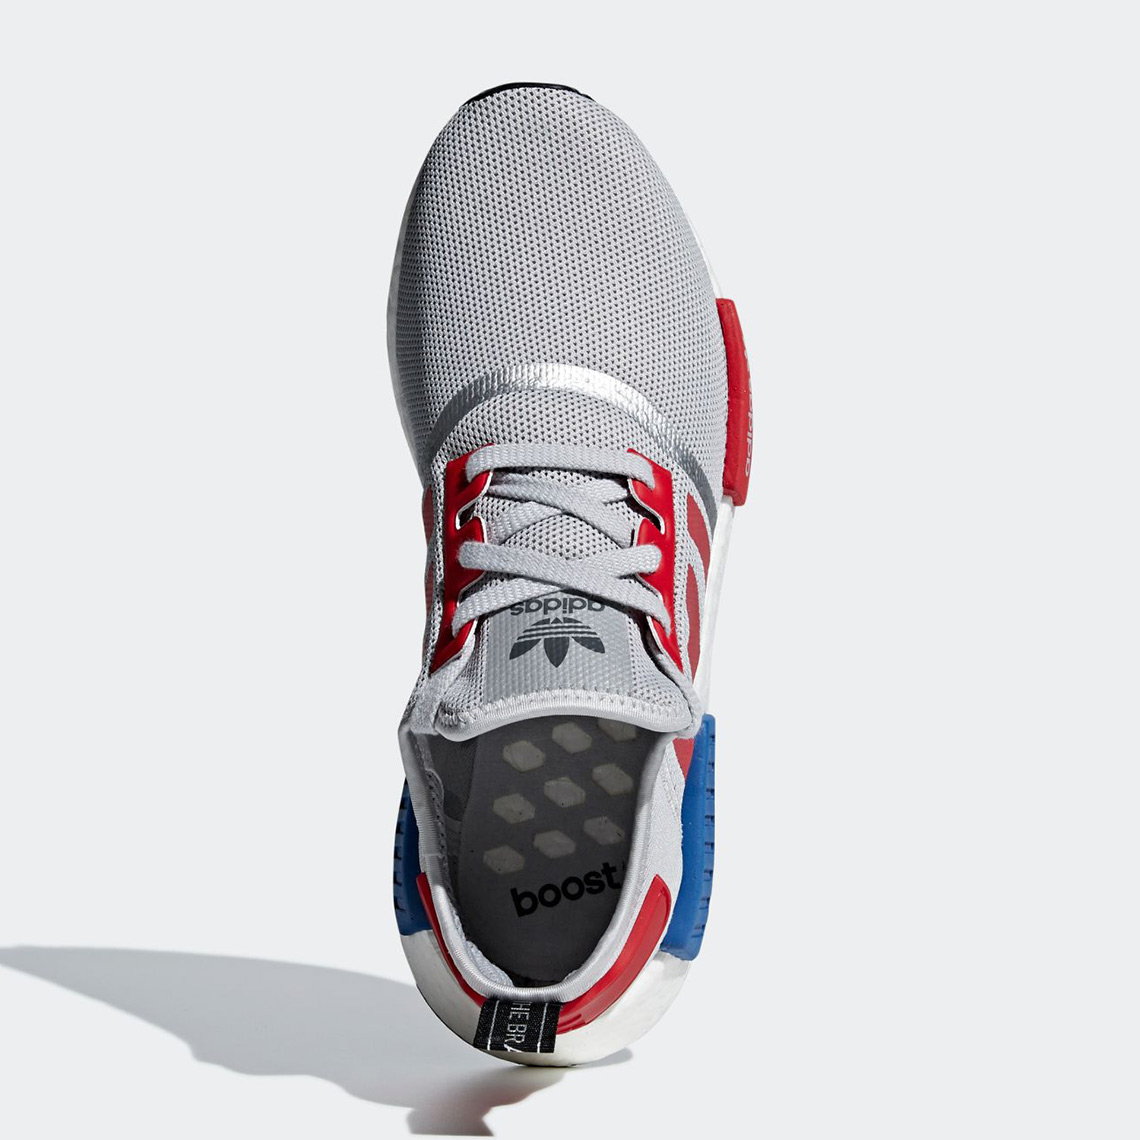 adidas NMD R1 Micropacer F99714 Release 